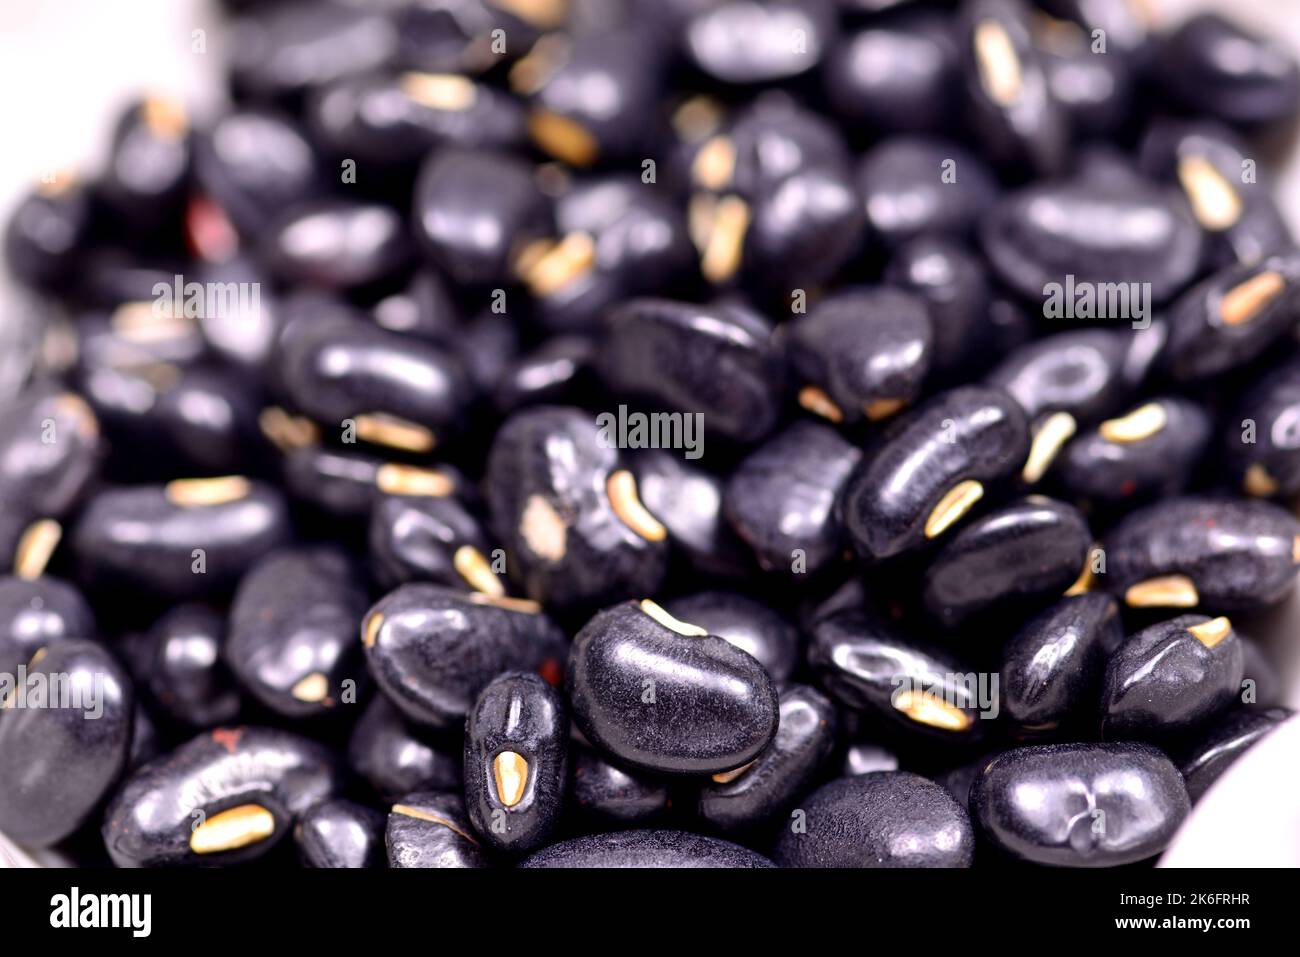 Chinese black soybeans in a closeup Stock Photo